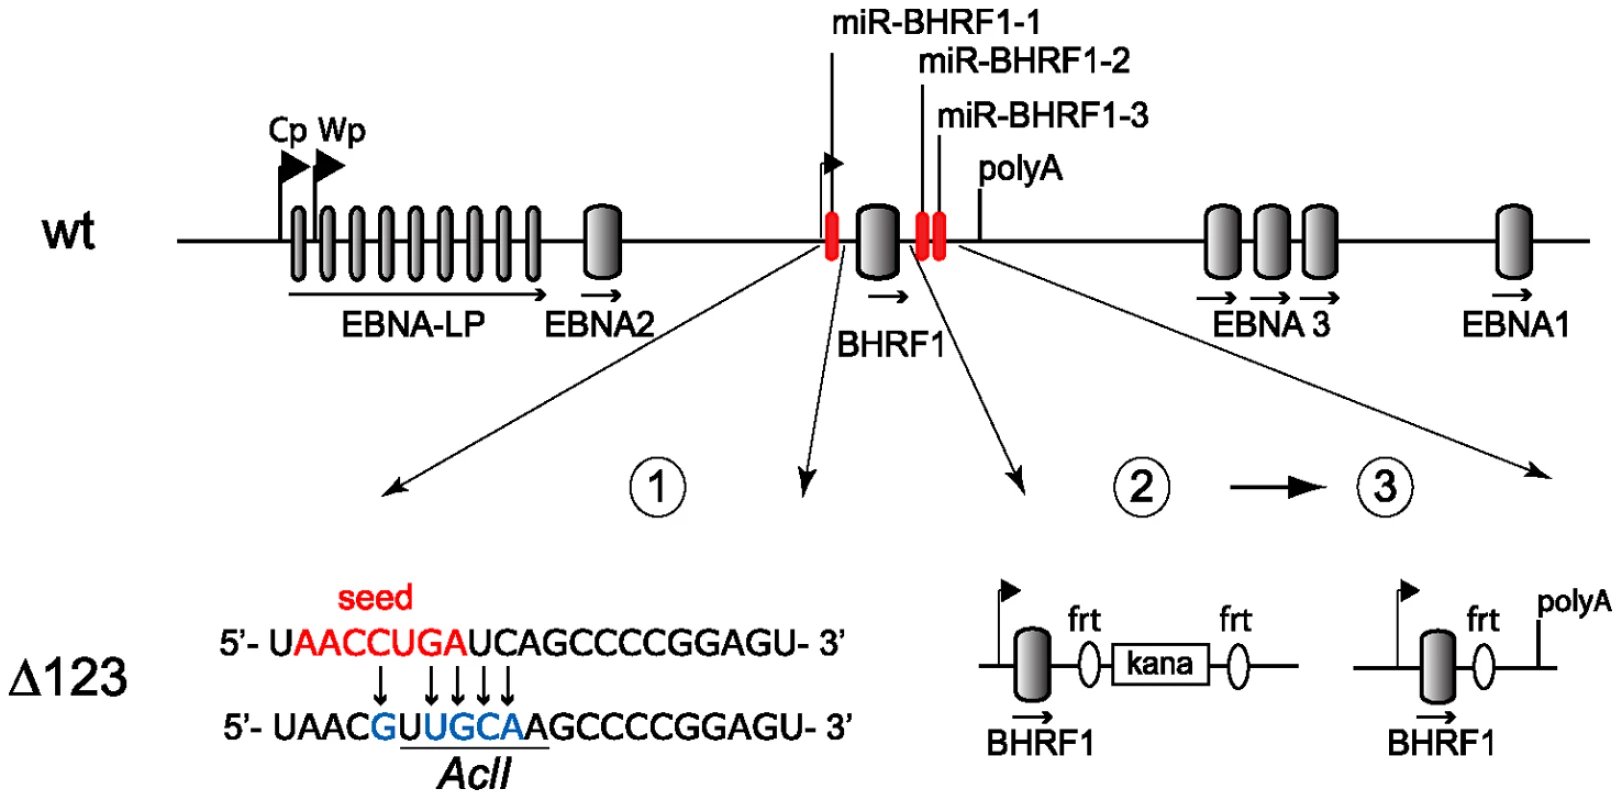 Construction of the BHRF1 miRNA viral mutant.